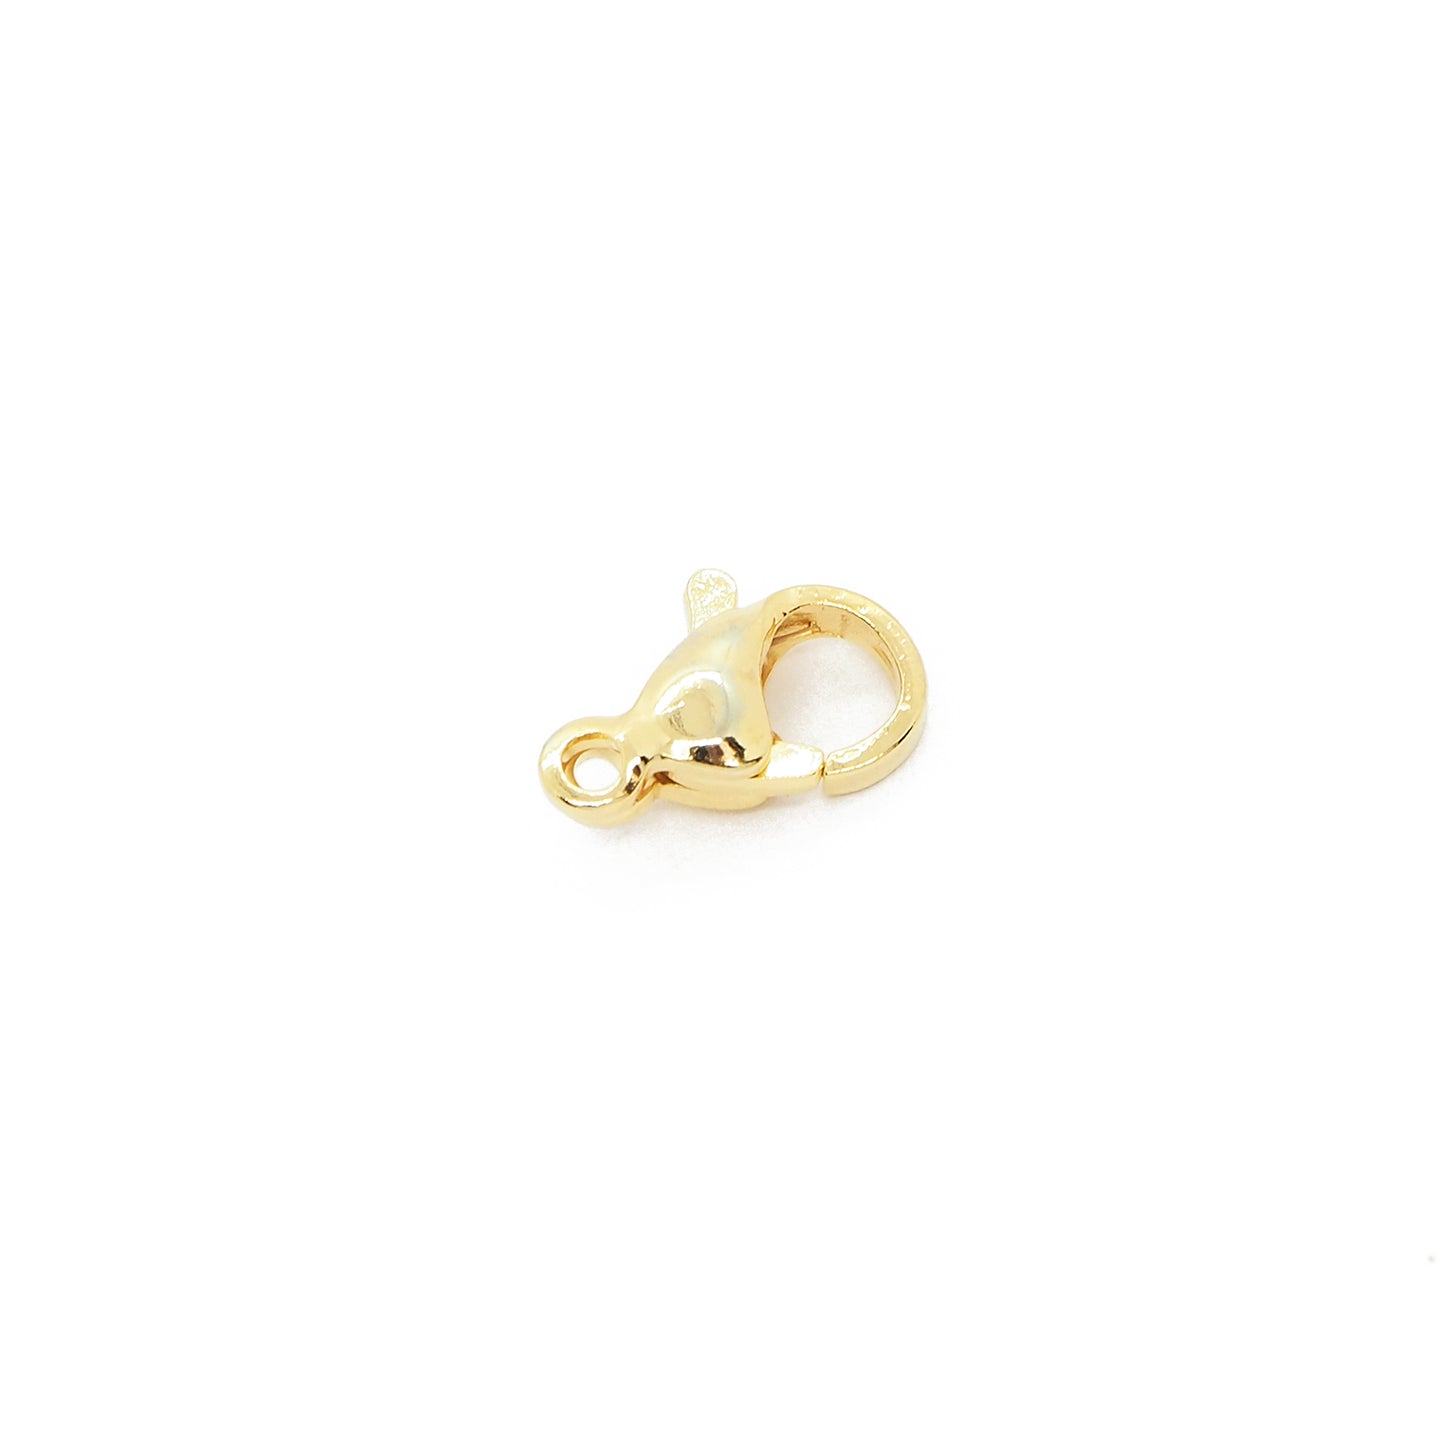 Lobster clasp / stainless steel gold plated / 10 mm